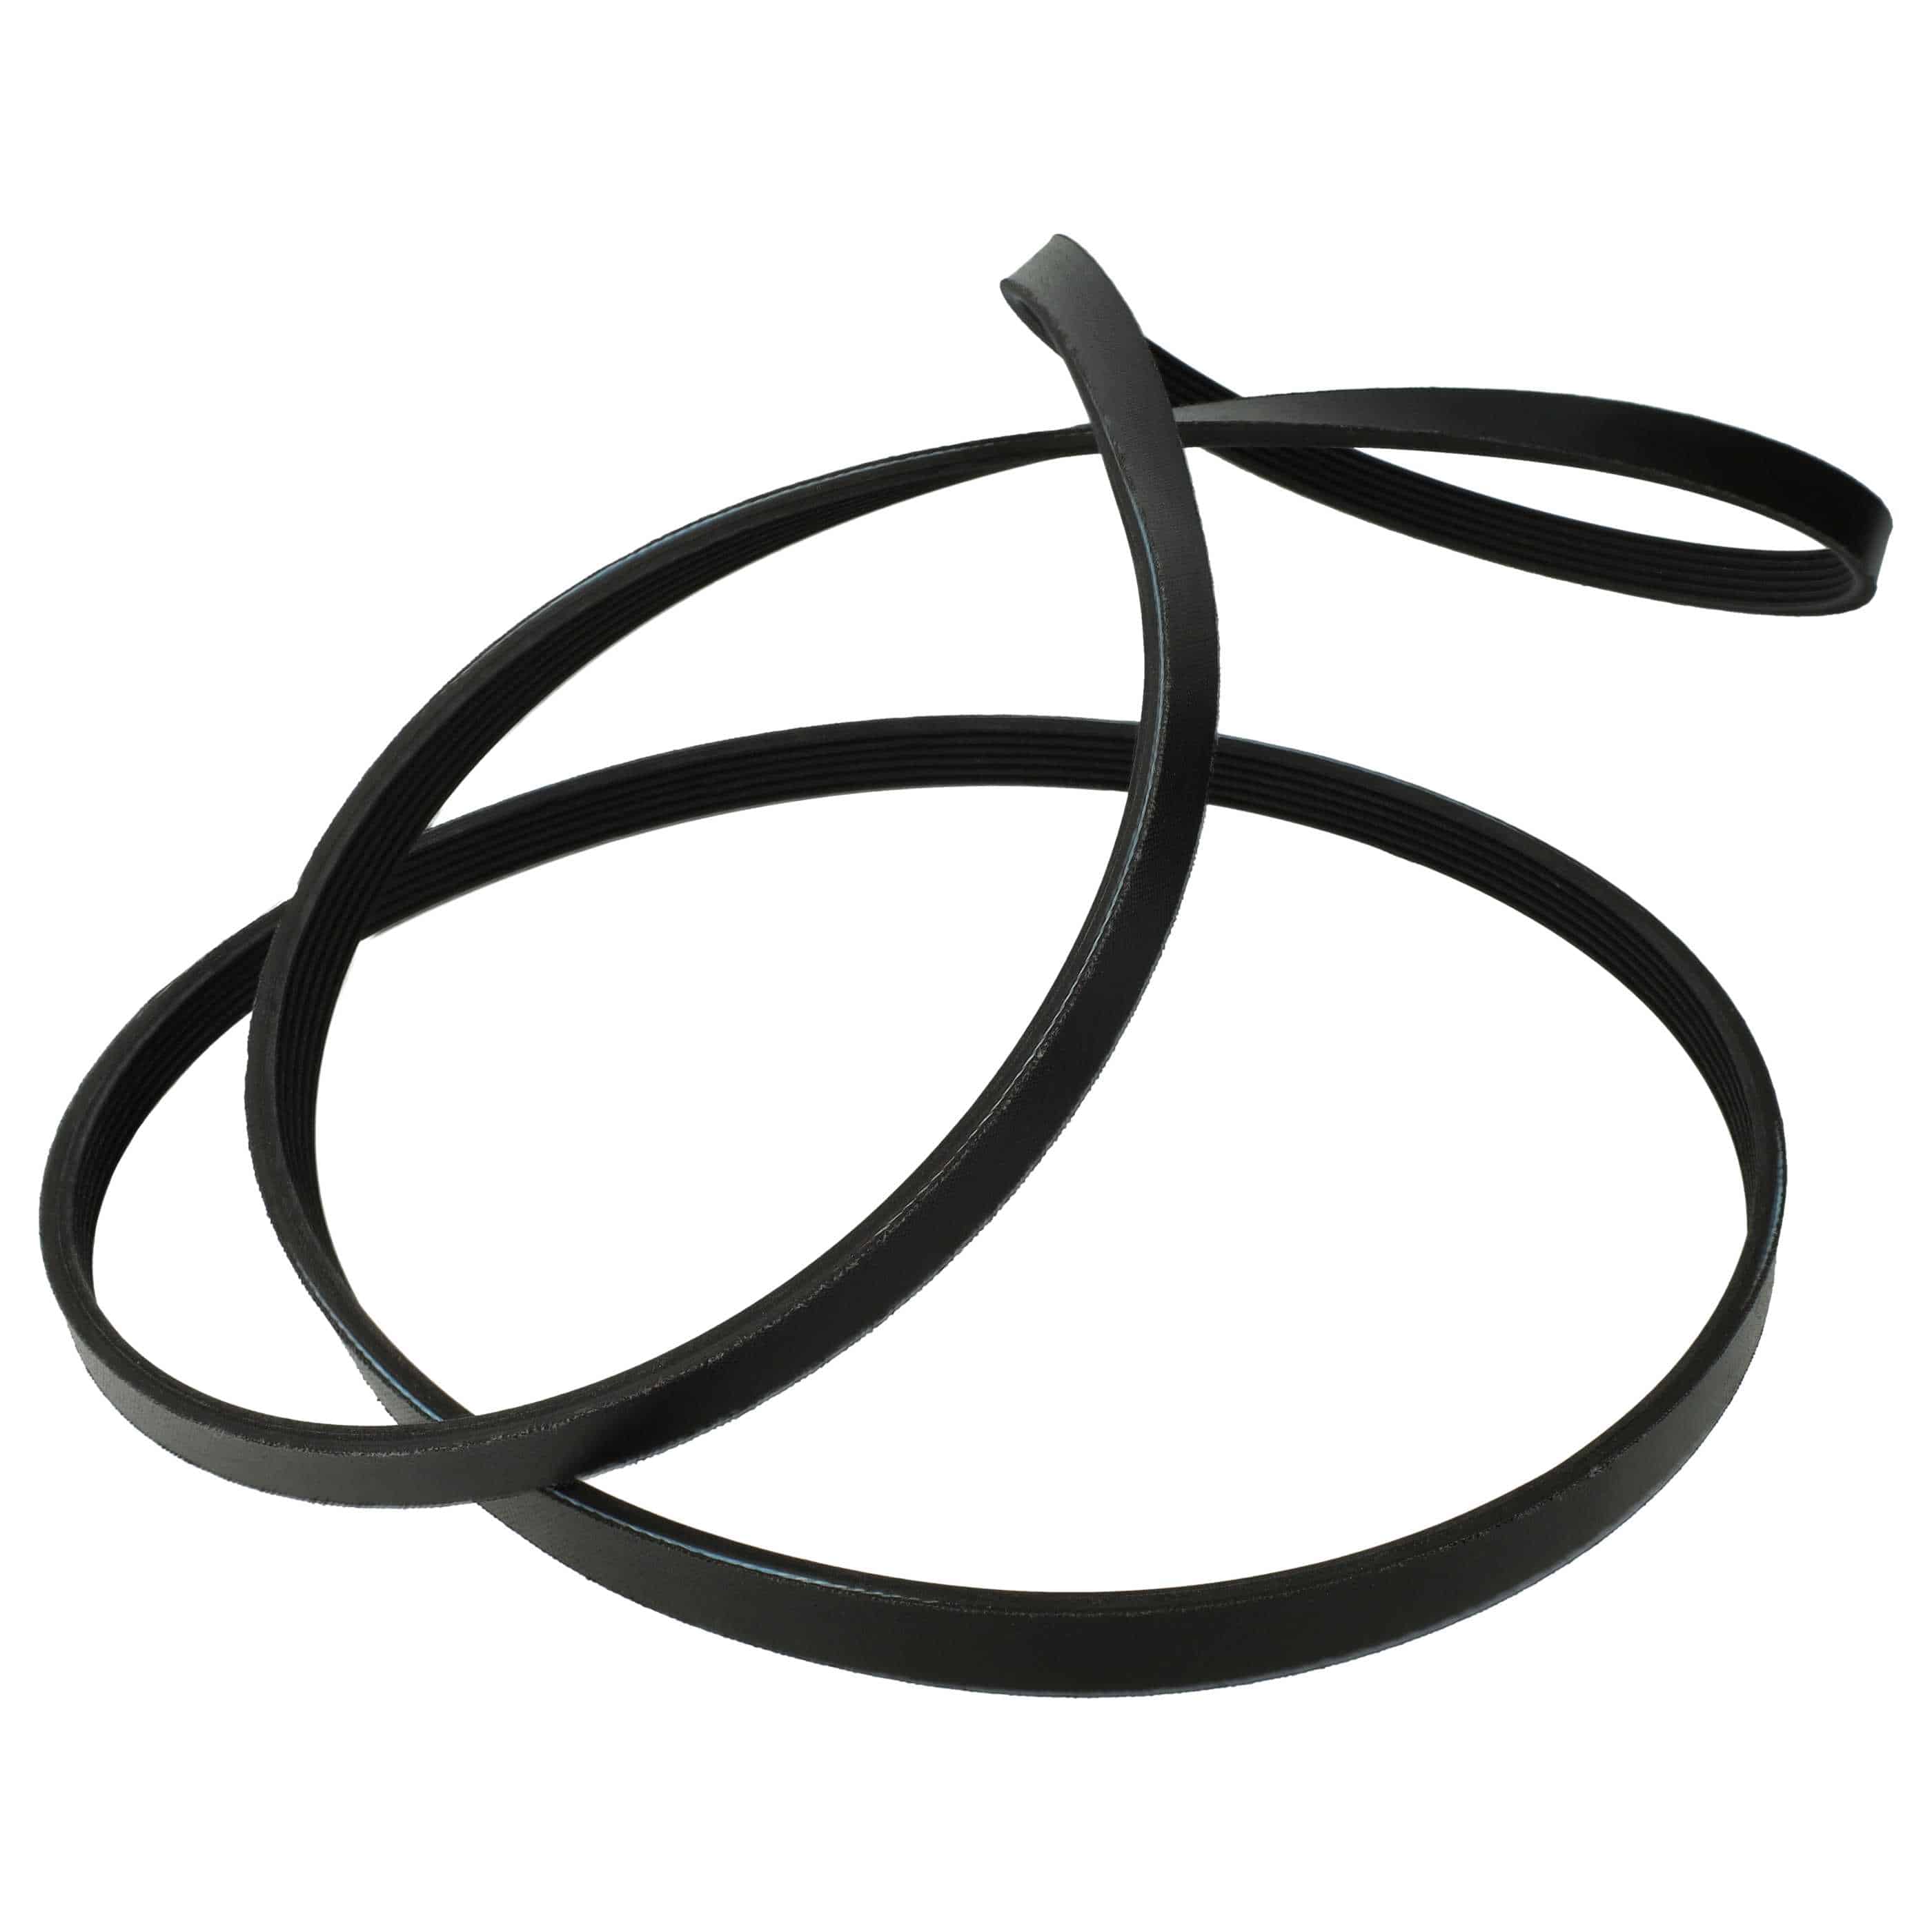 Drive Belt replaces Miele 5017140 for Miele Tumble Dryer - 191.5cm